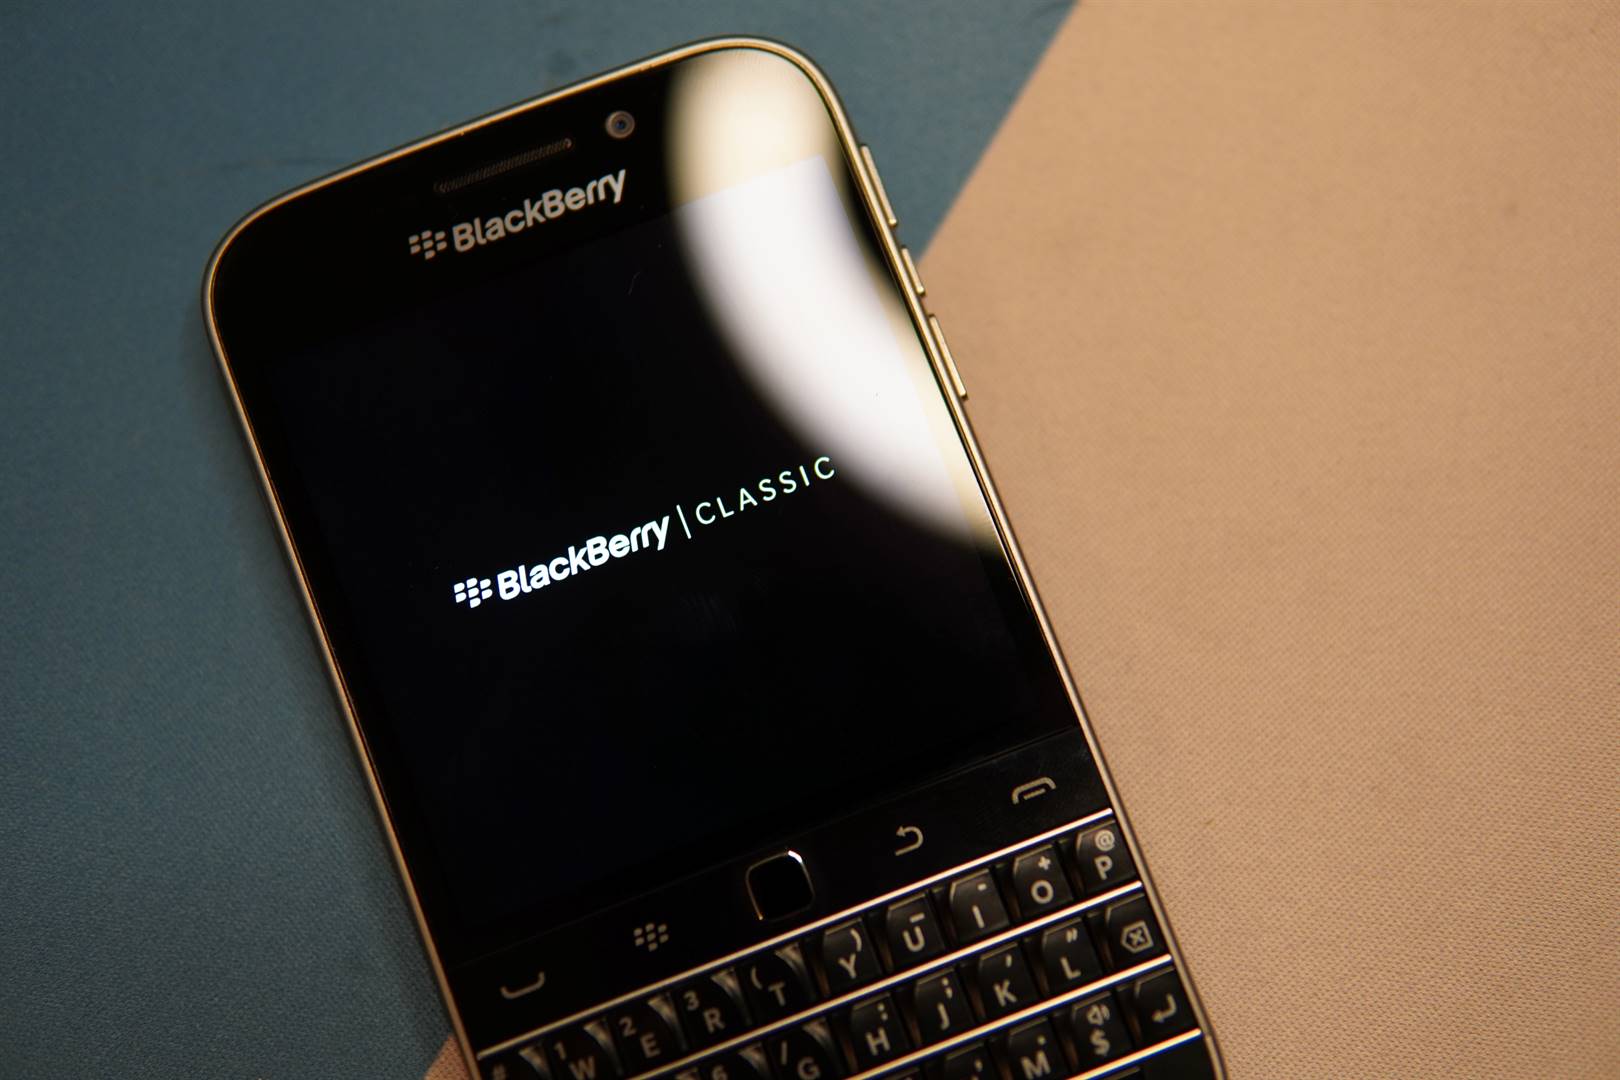 BlackBerry devices running the original operating system and services will no longer be supported after January 4, marking the end of an era for the storied device that catapulted work into the mobile era. Photo: Unsplash